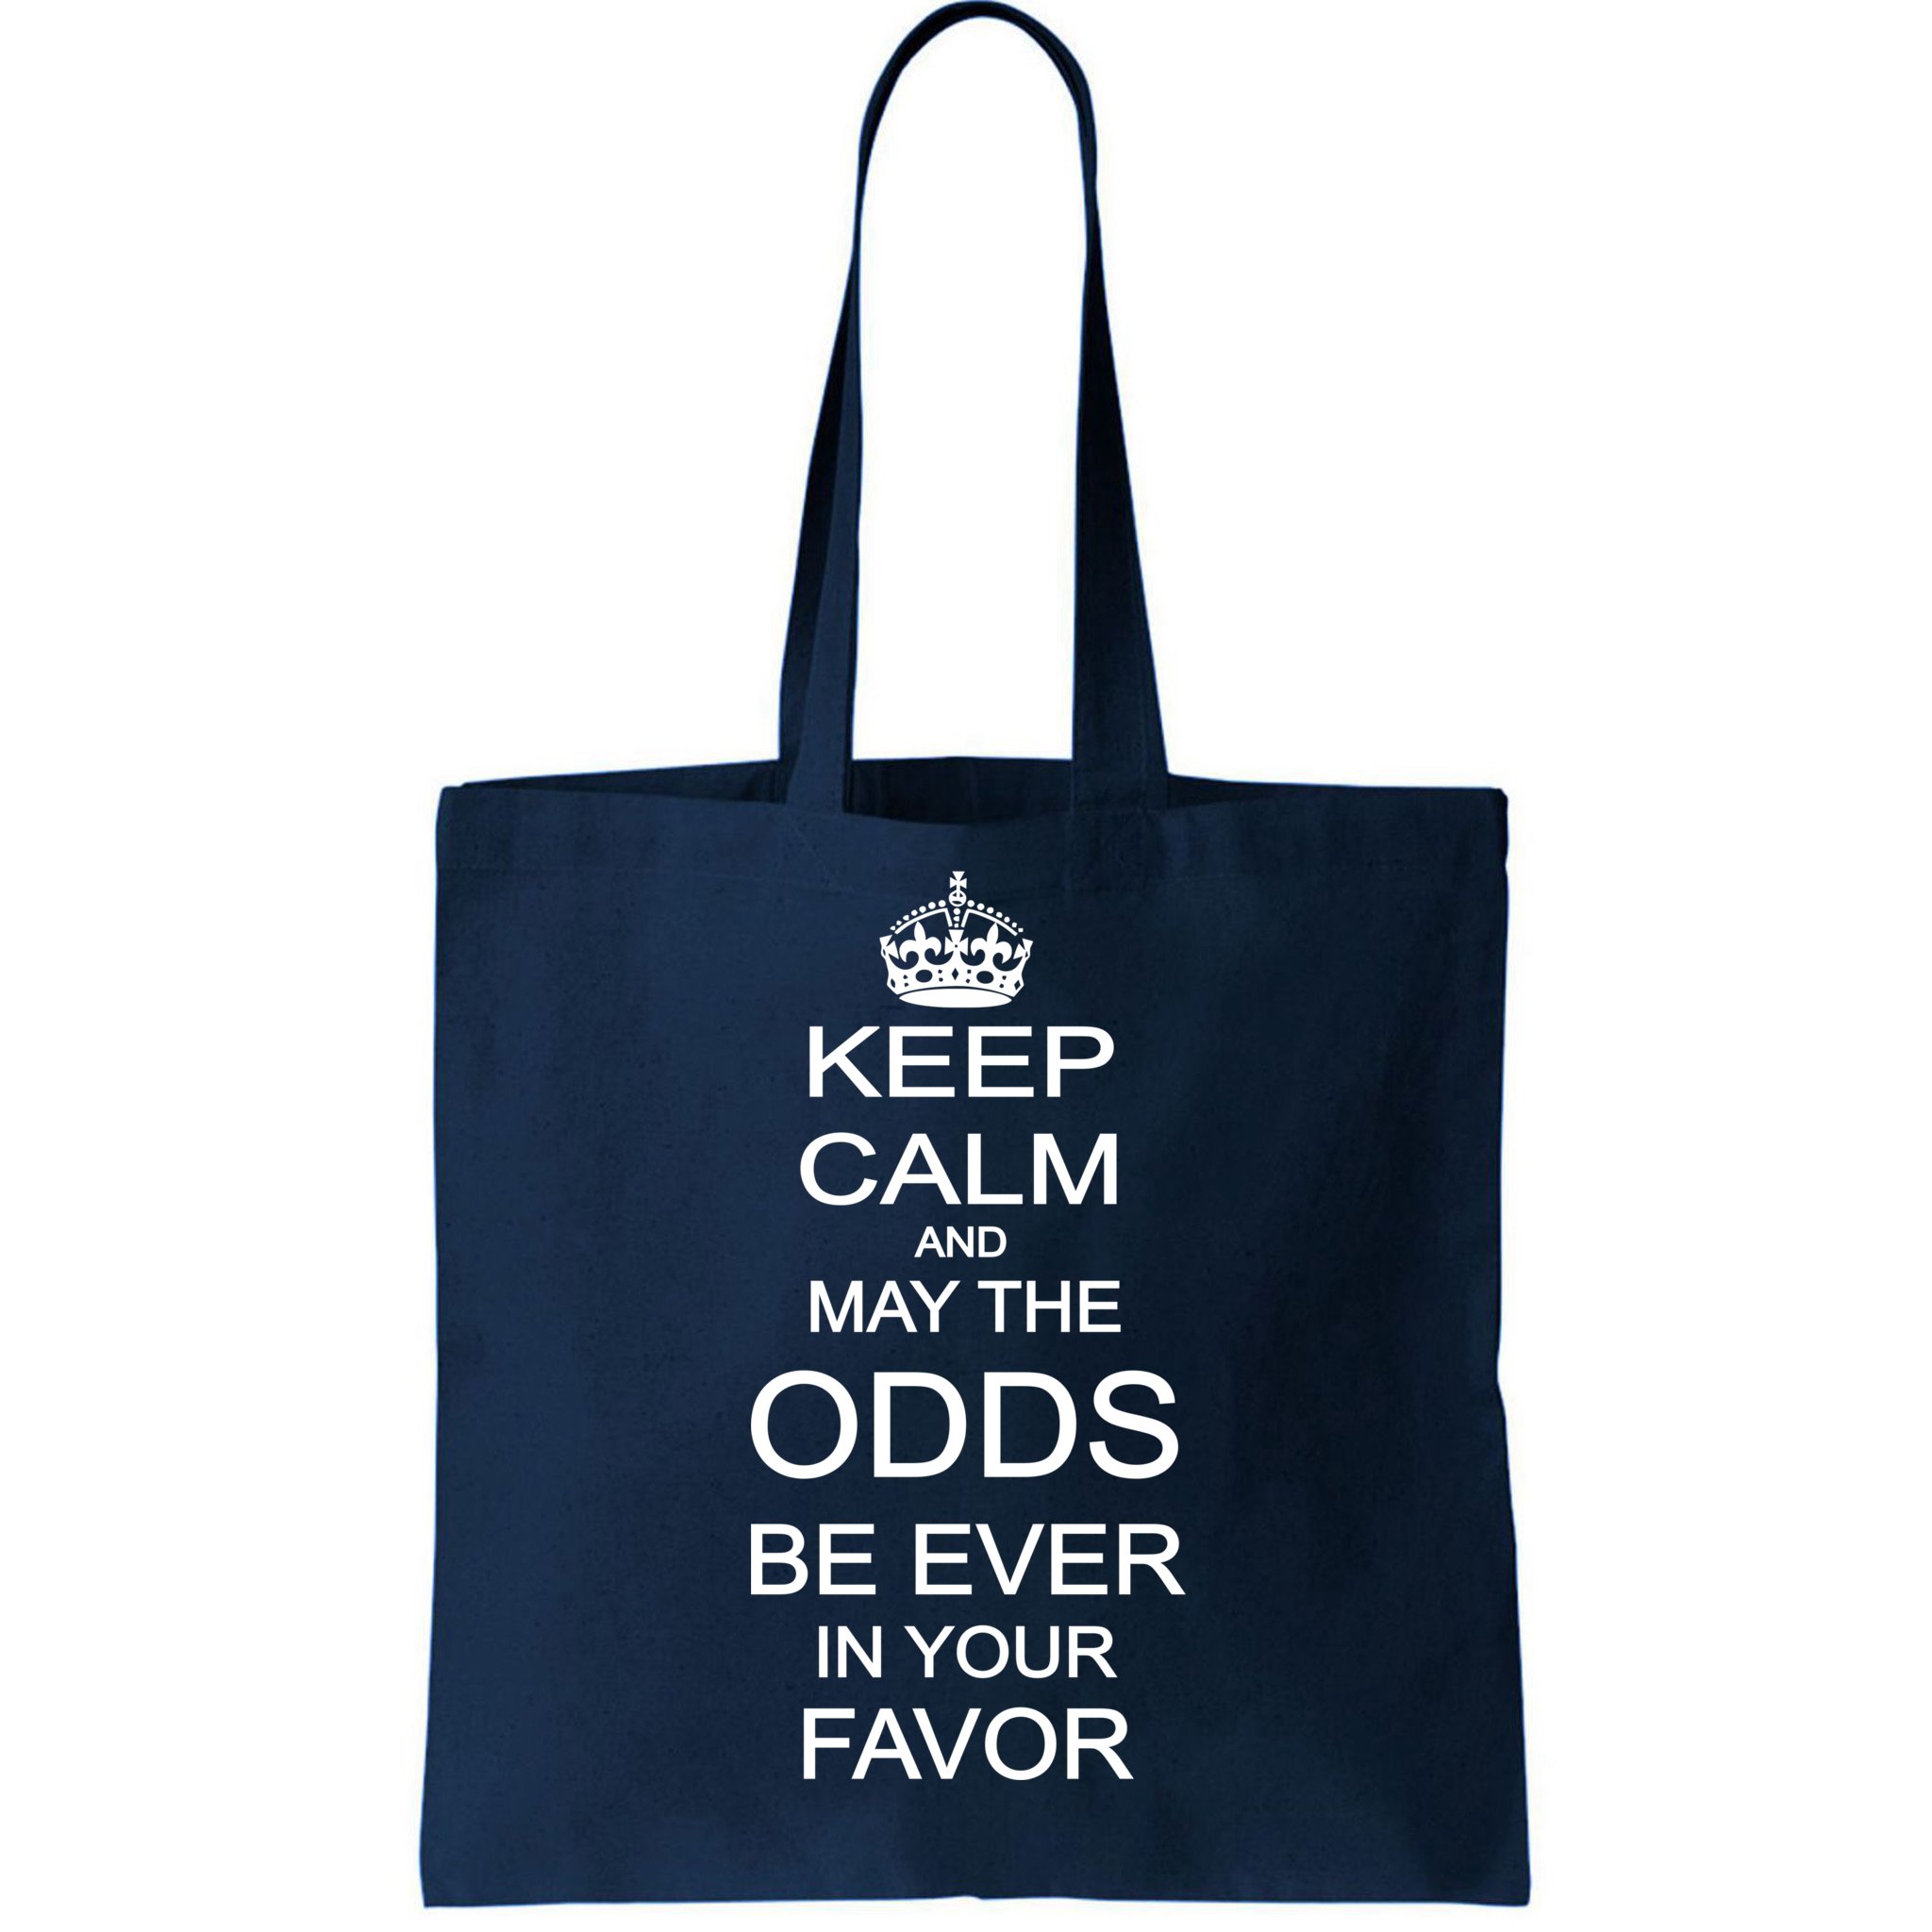 MAY THE ODDS BE EVER IN YOUR FAVOR Black Drawstring Bag NEW 